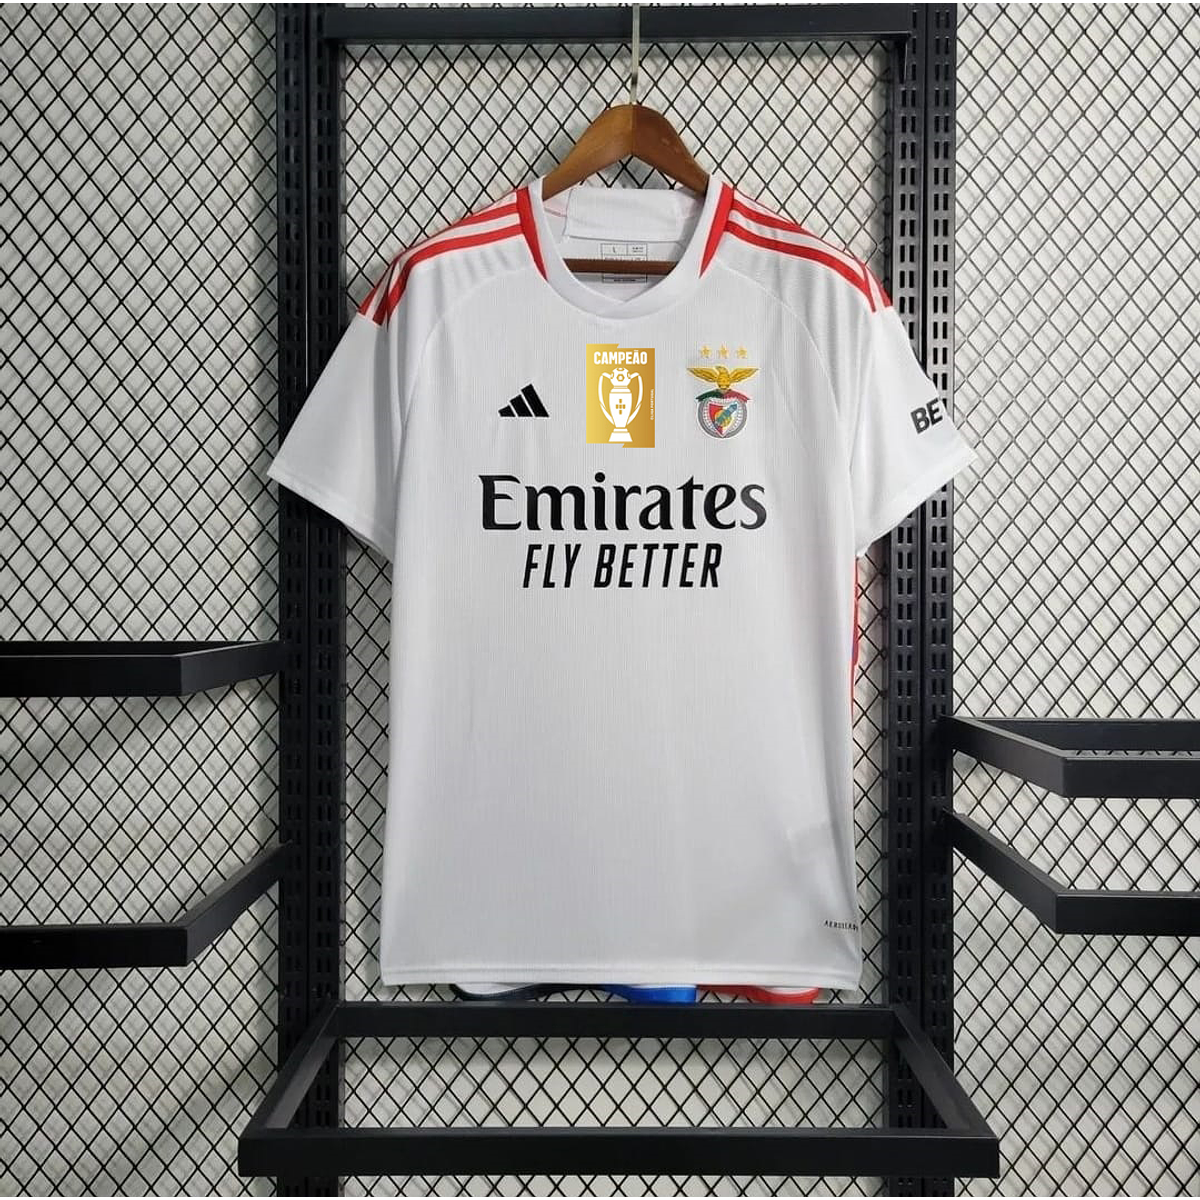 Camisola 3rd S.L Benfica 20223/24